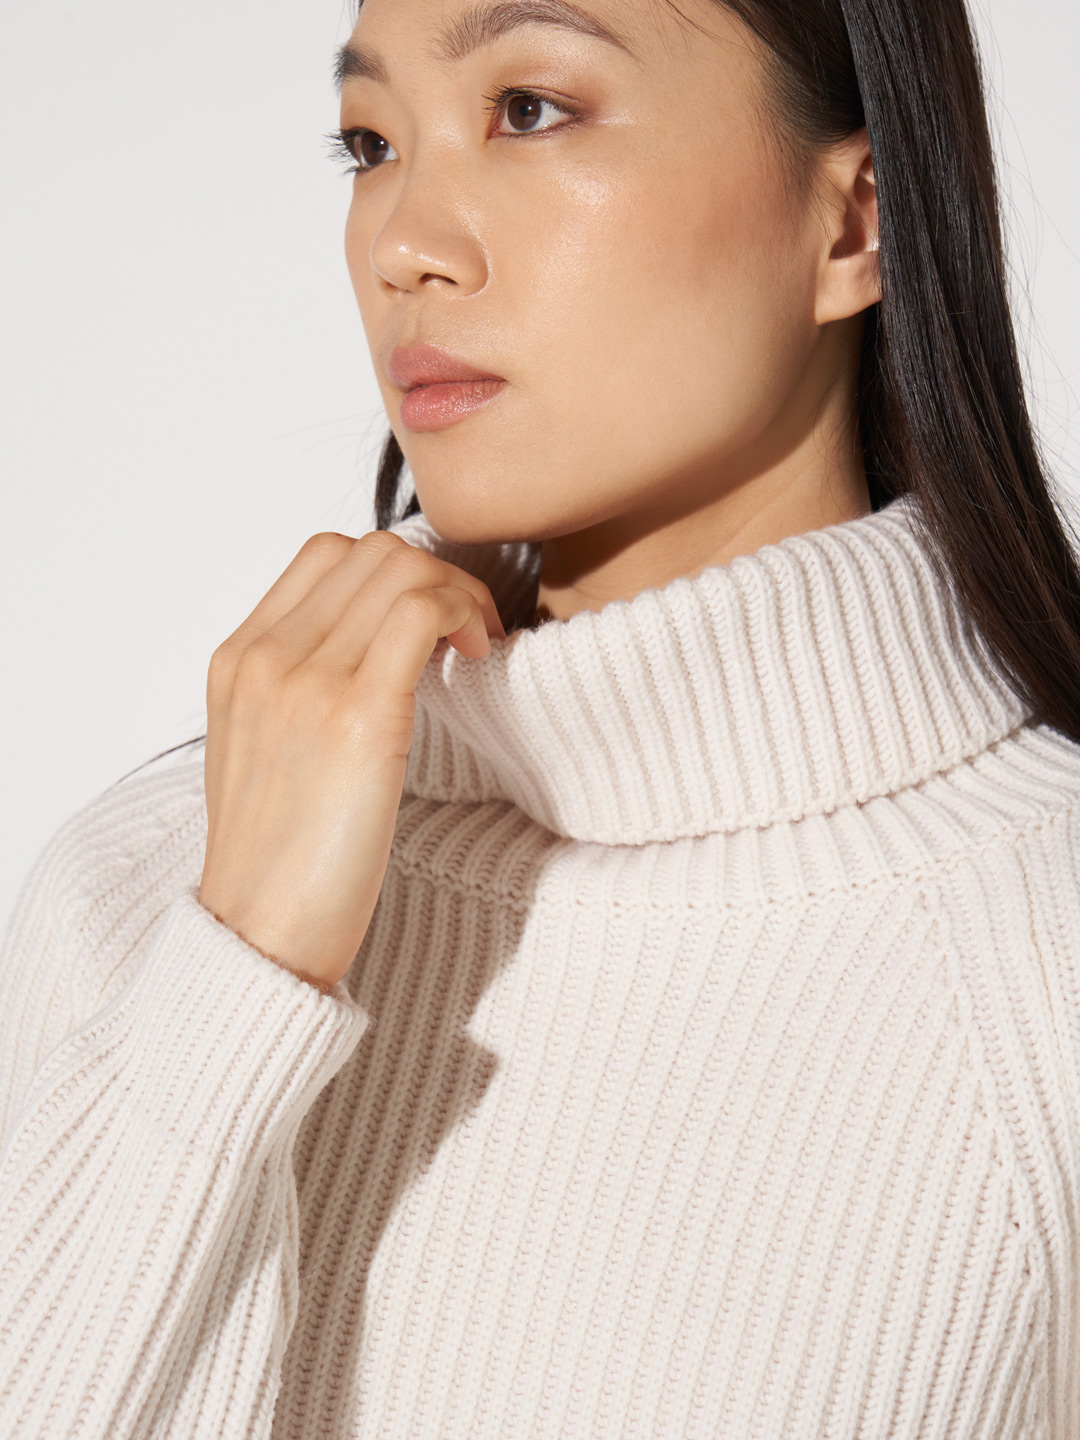 Woollen knit in a fisherman’s rib pattern with a high neck Mango